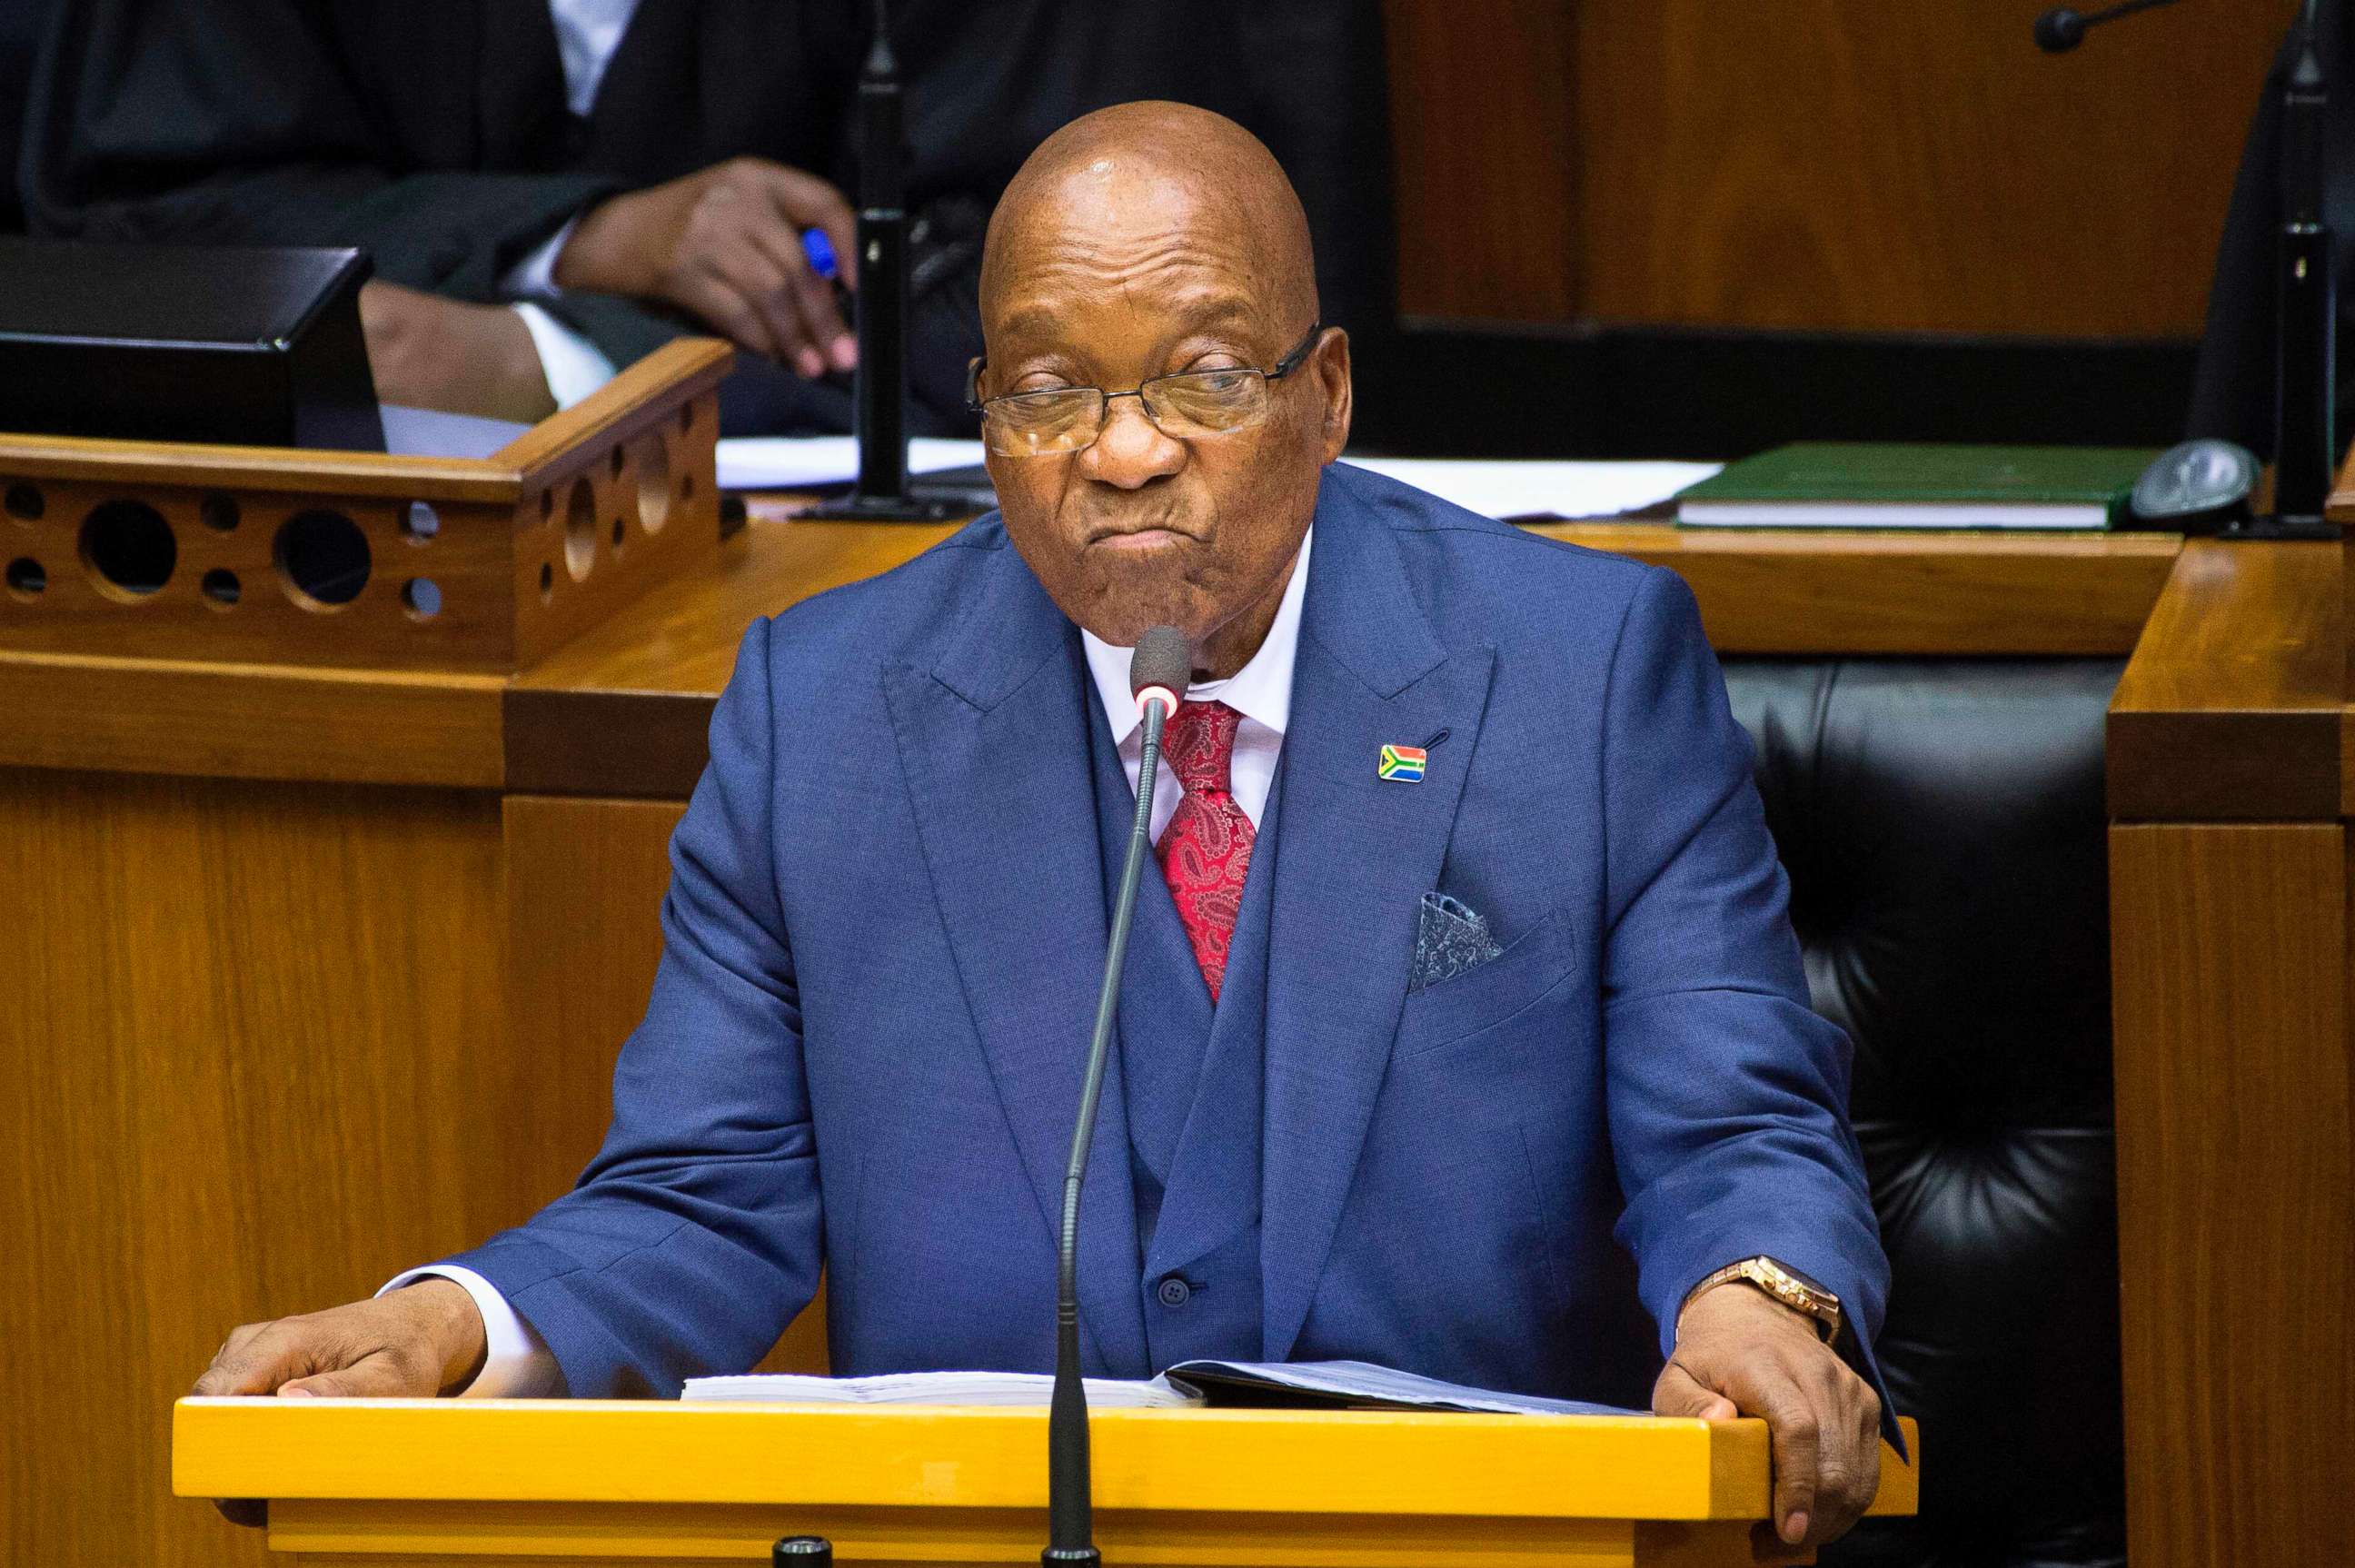 PHOTO: South African President Jacob Zuma answers questions during the last presidential answer session, Nov. 2, 2017 in the South African Parliament in Cape Town.